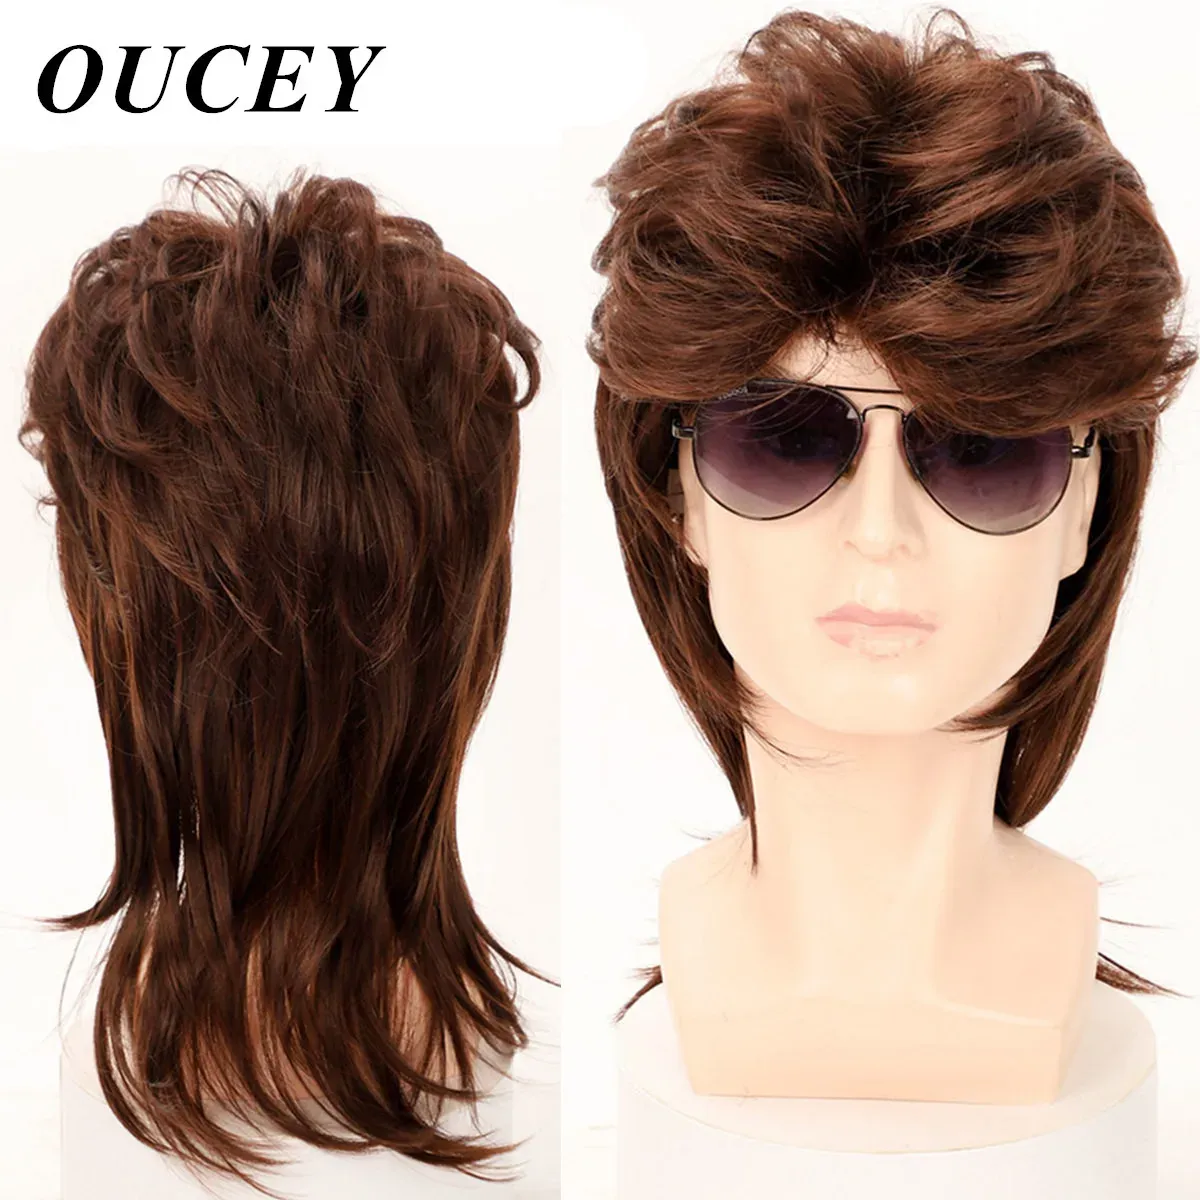 Wigs OUCEY Wigs for Men Heat Resistant Fiber Synthetic Hair Men's Wig Black Brown Natural Wigs Male Retro Rock Party Cosplay Wig